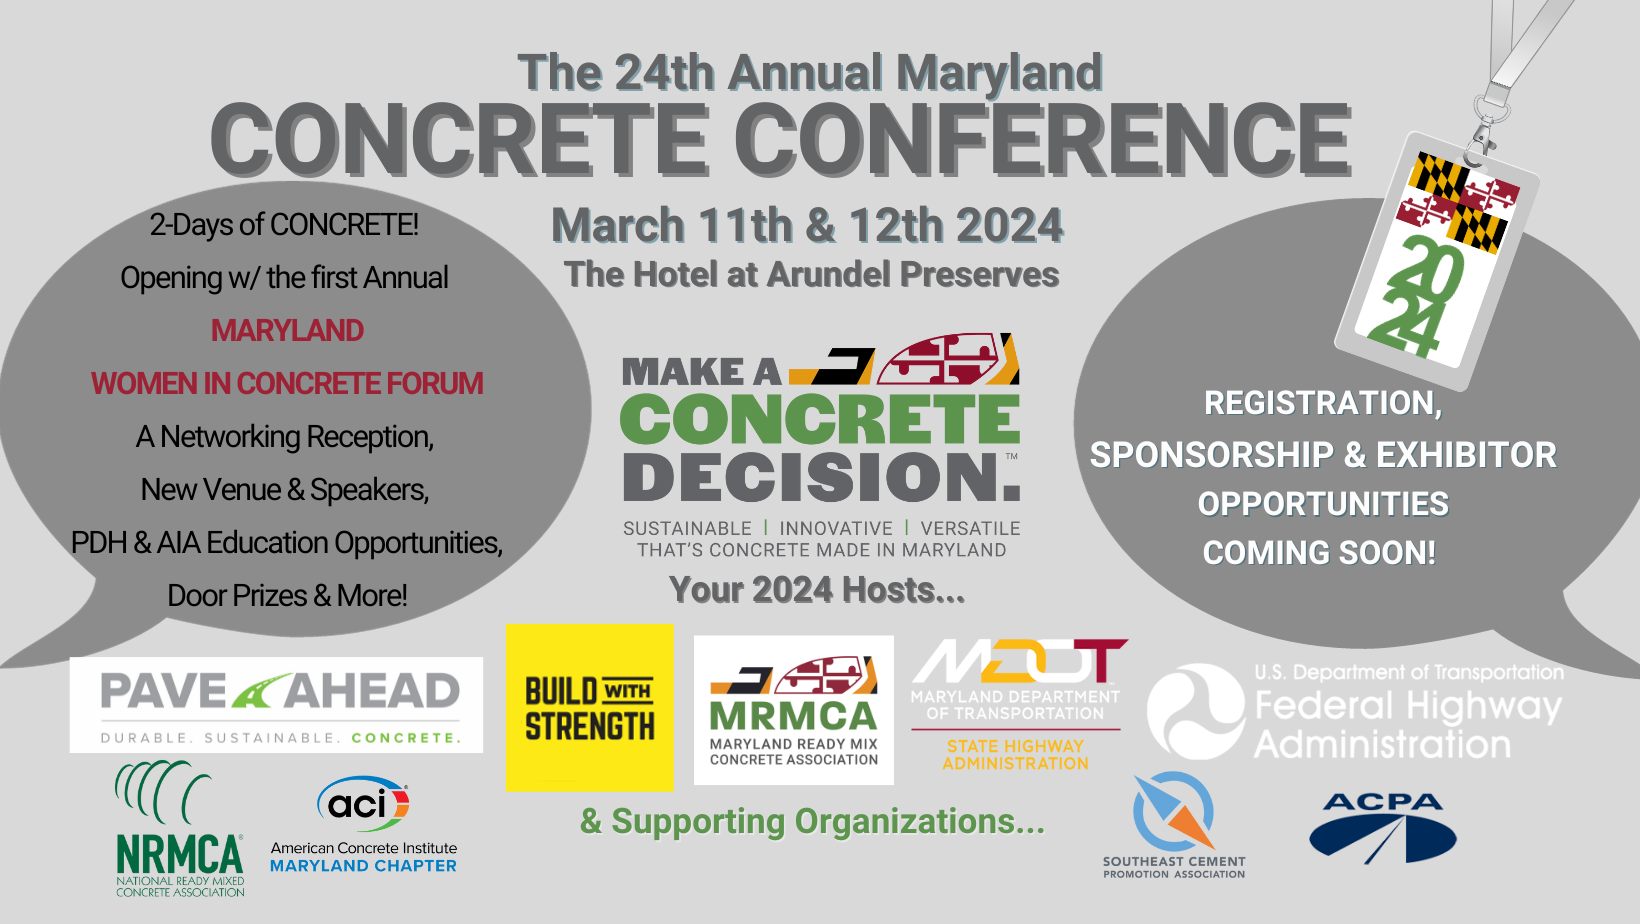 The 24th Annual Maryland Concrete Conference